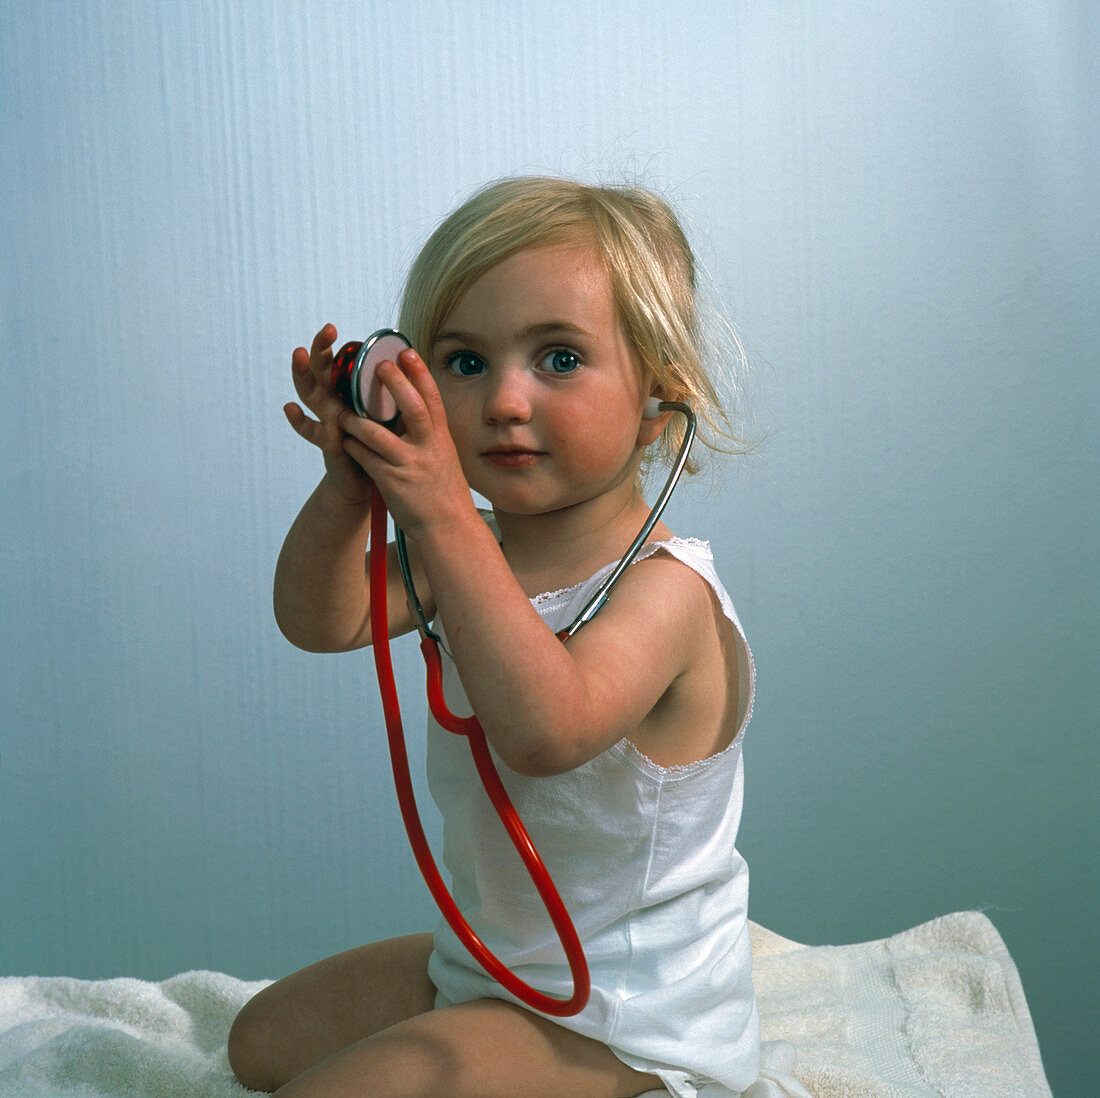 Girl playing with a stethoscope